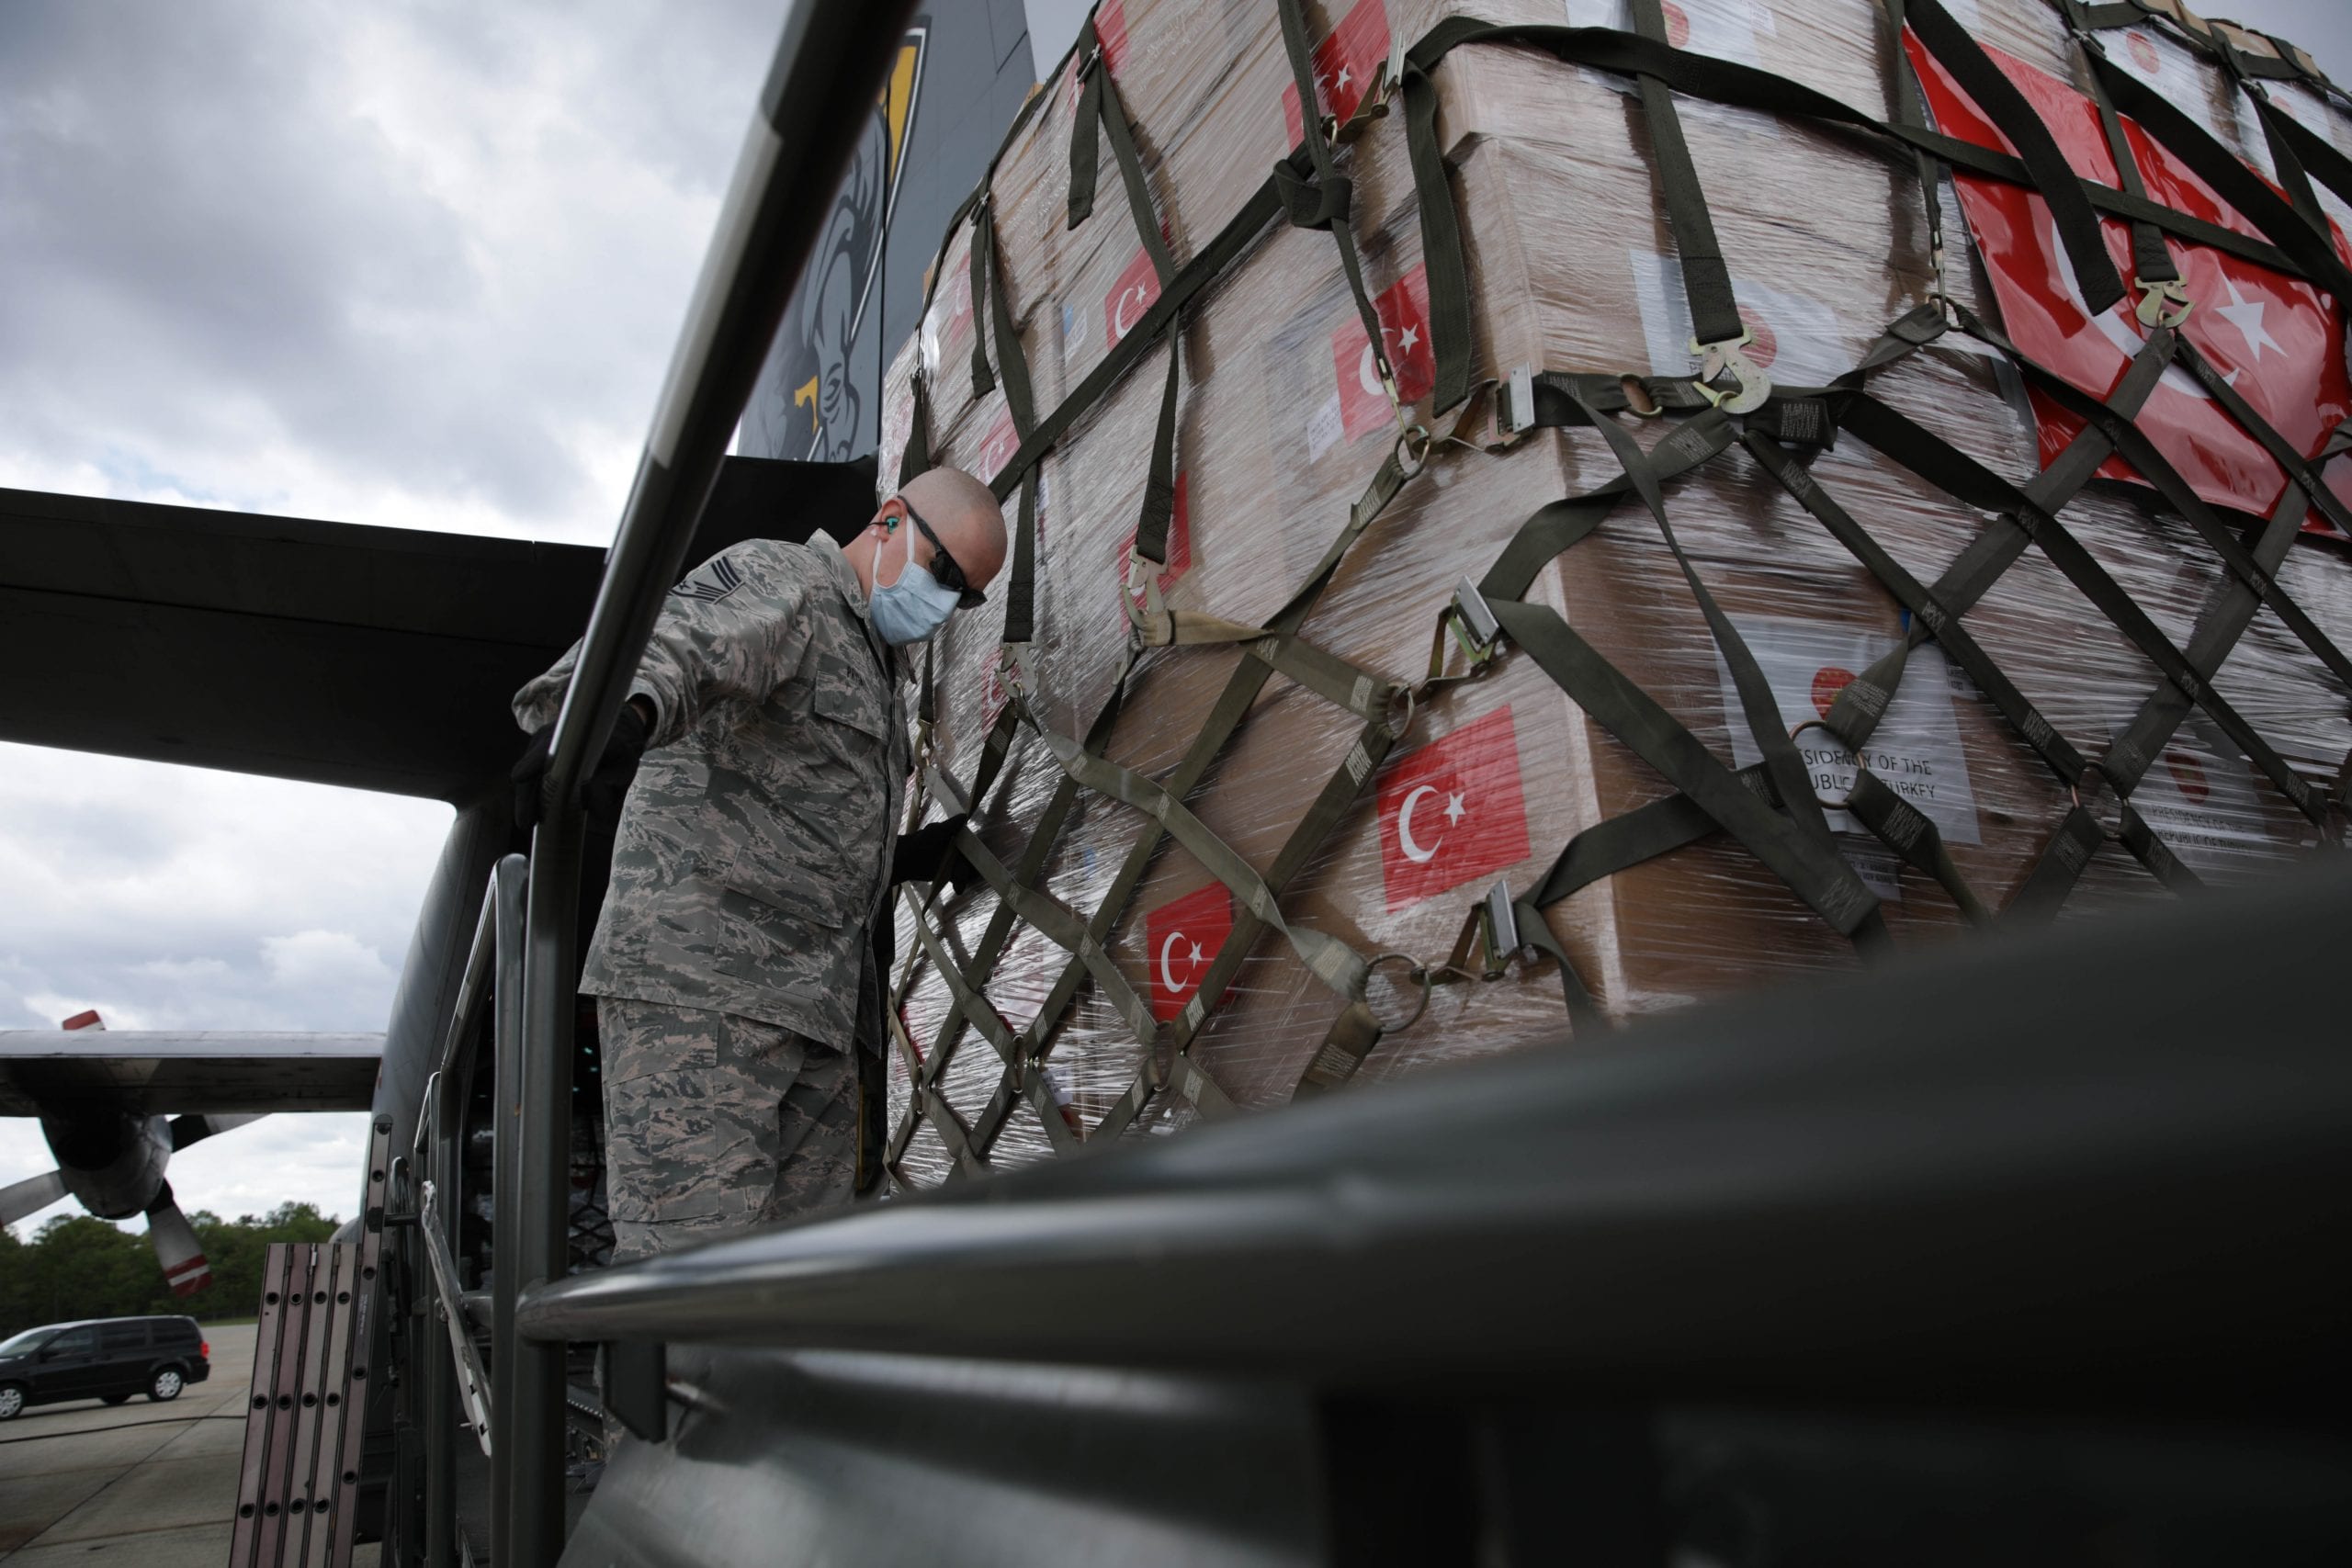 US thanks Turkey for for sending medical aid amid COVID-19 outbreak